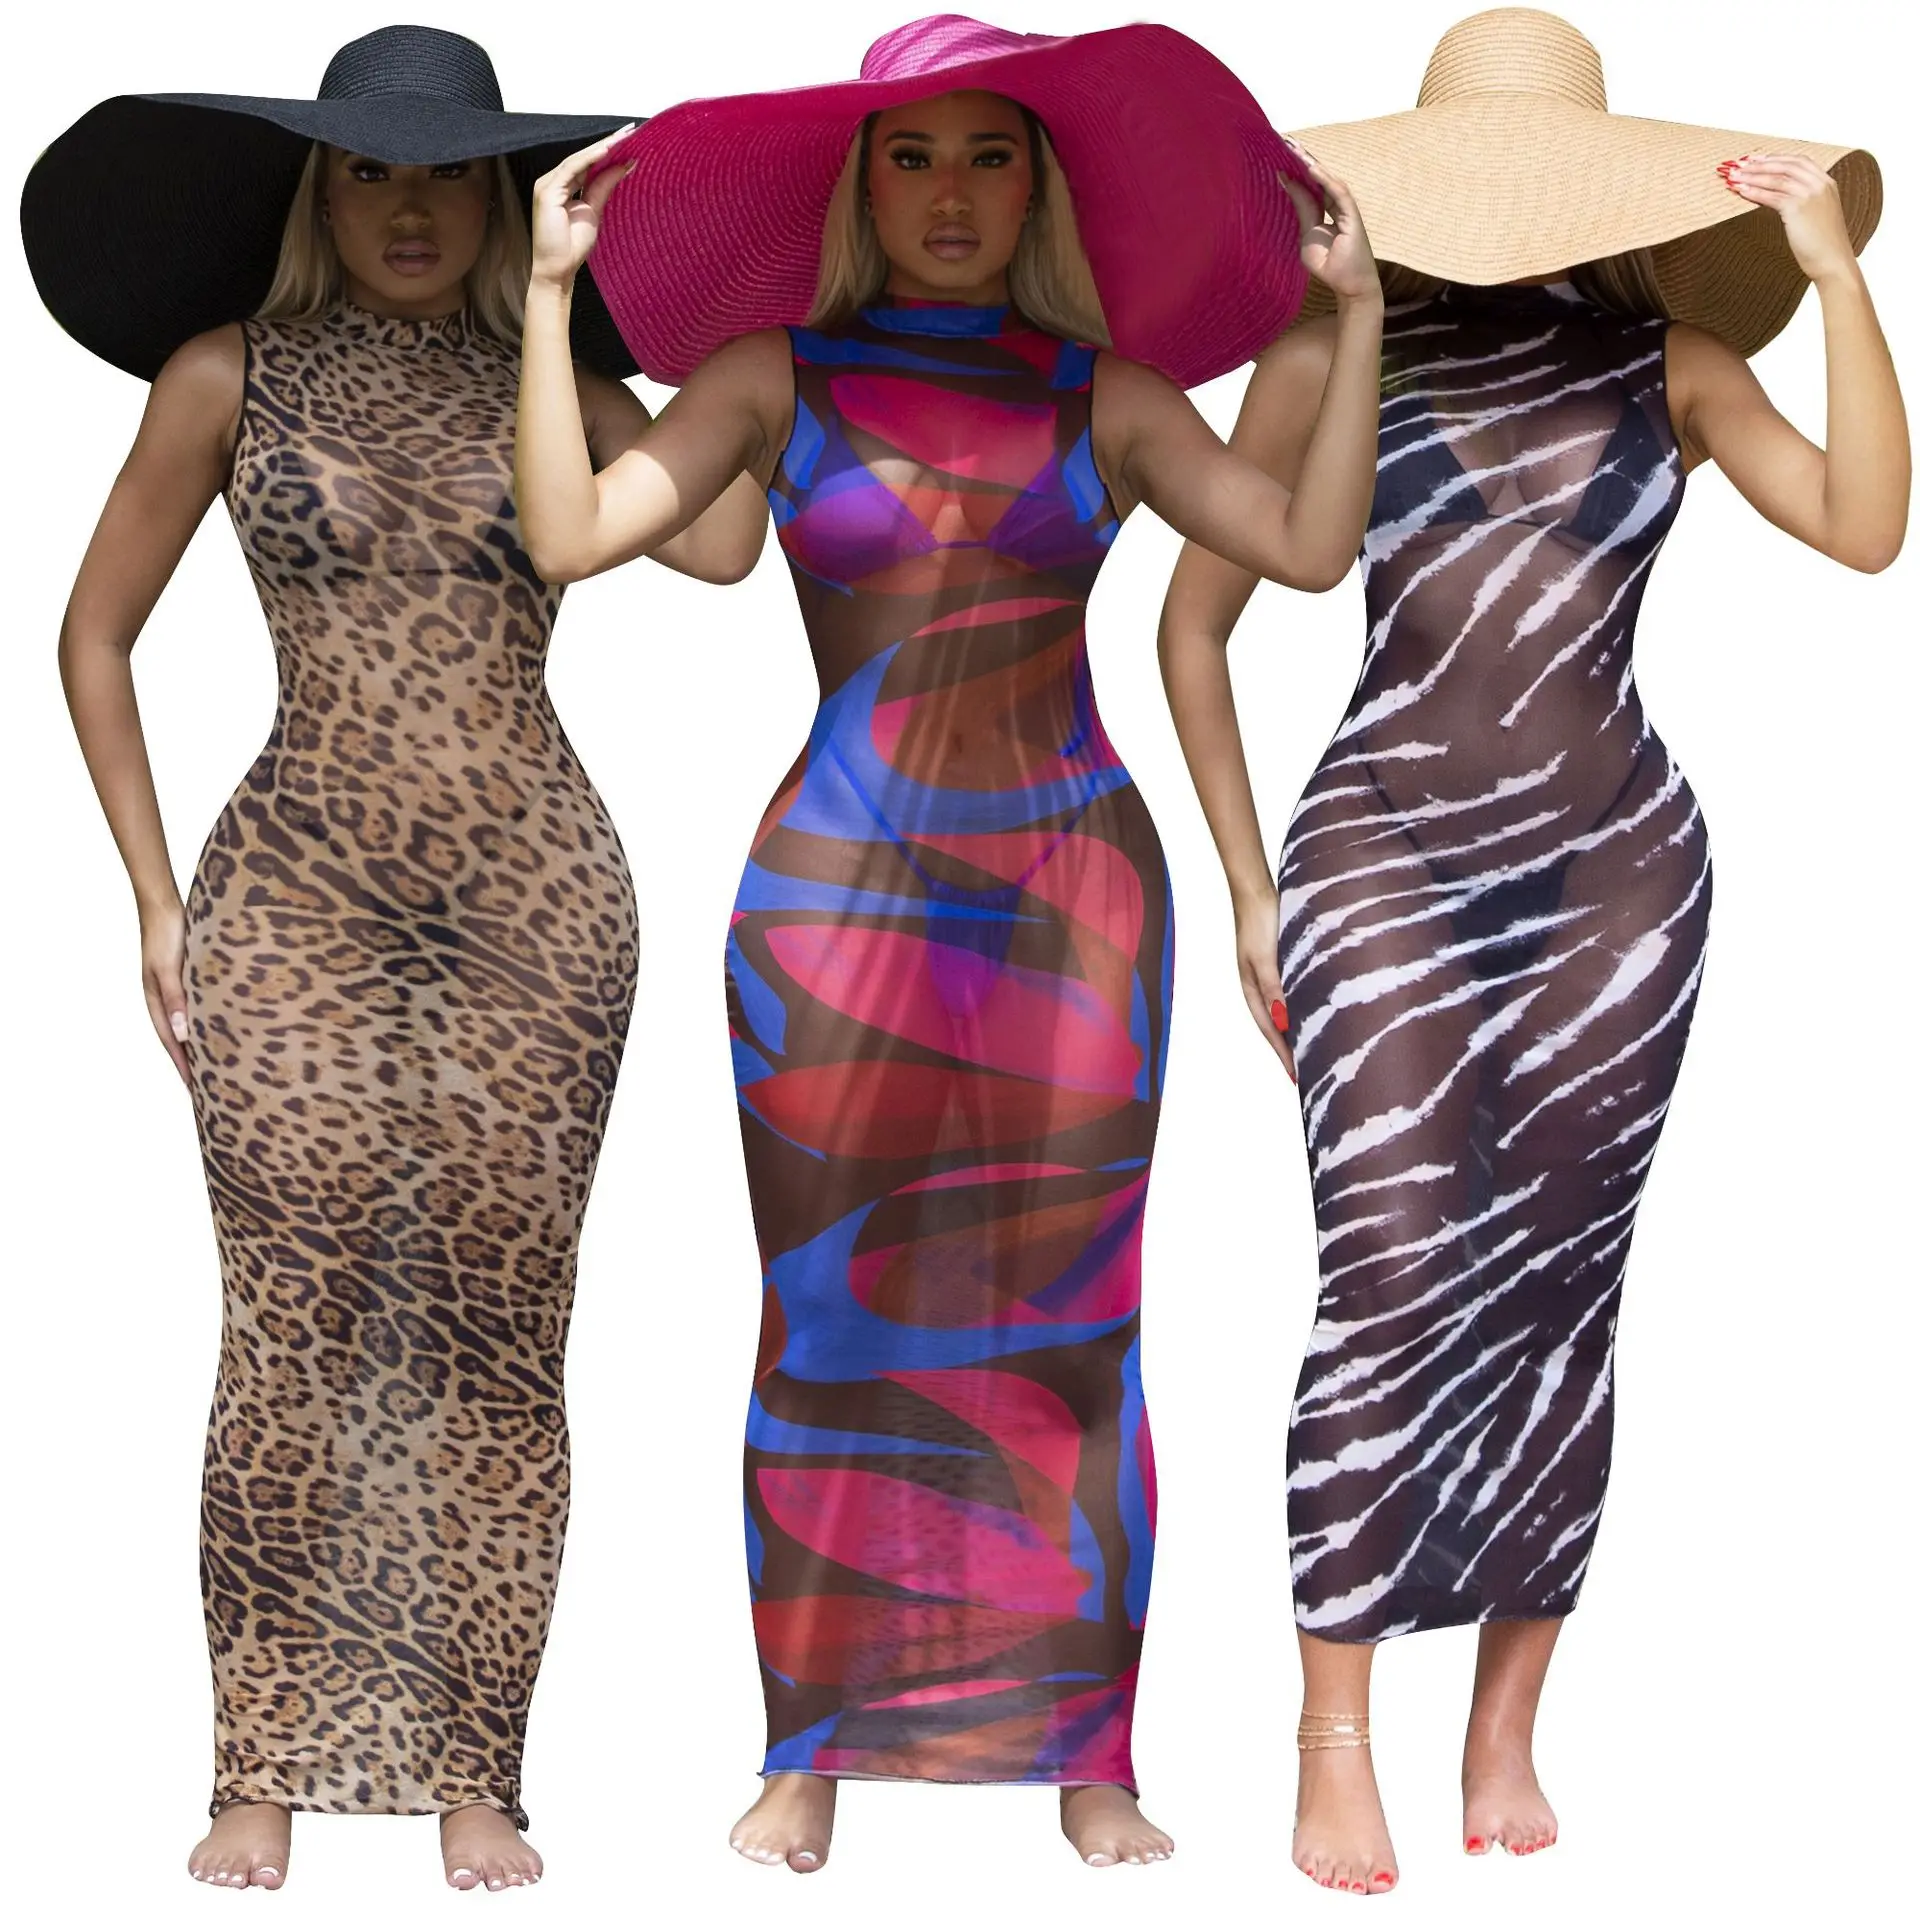 

2021 Fashion Women Aesthetic Summer Clothes Trend Sexy Sheer Mesh Leopard Bodycon Maxi Beach Dress Vacation Outfits